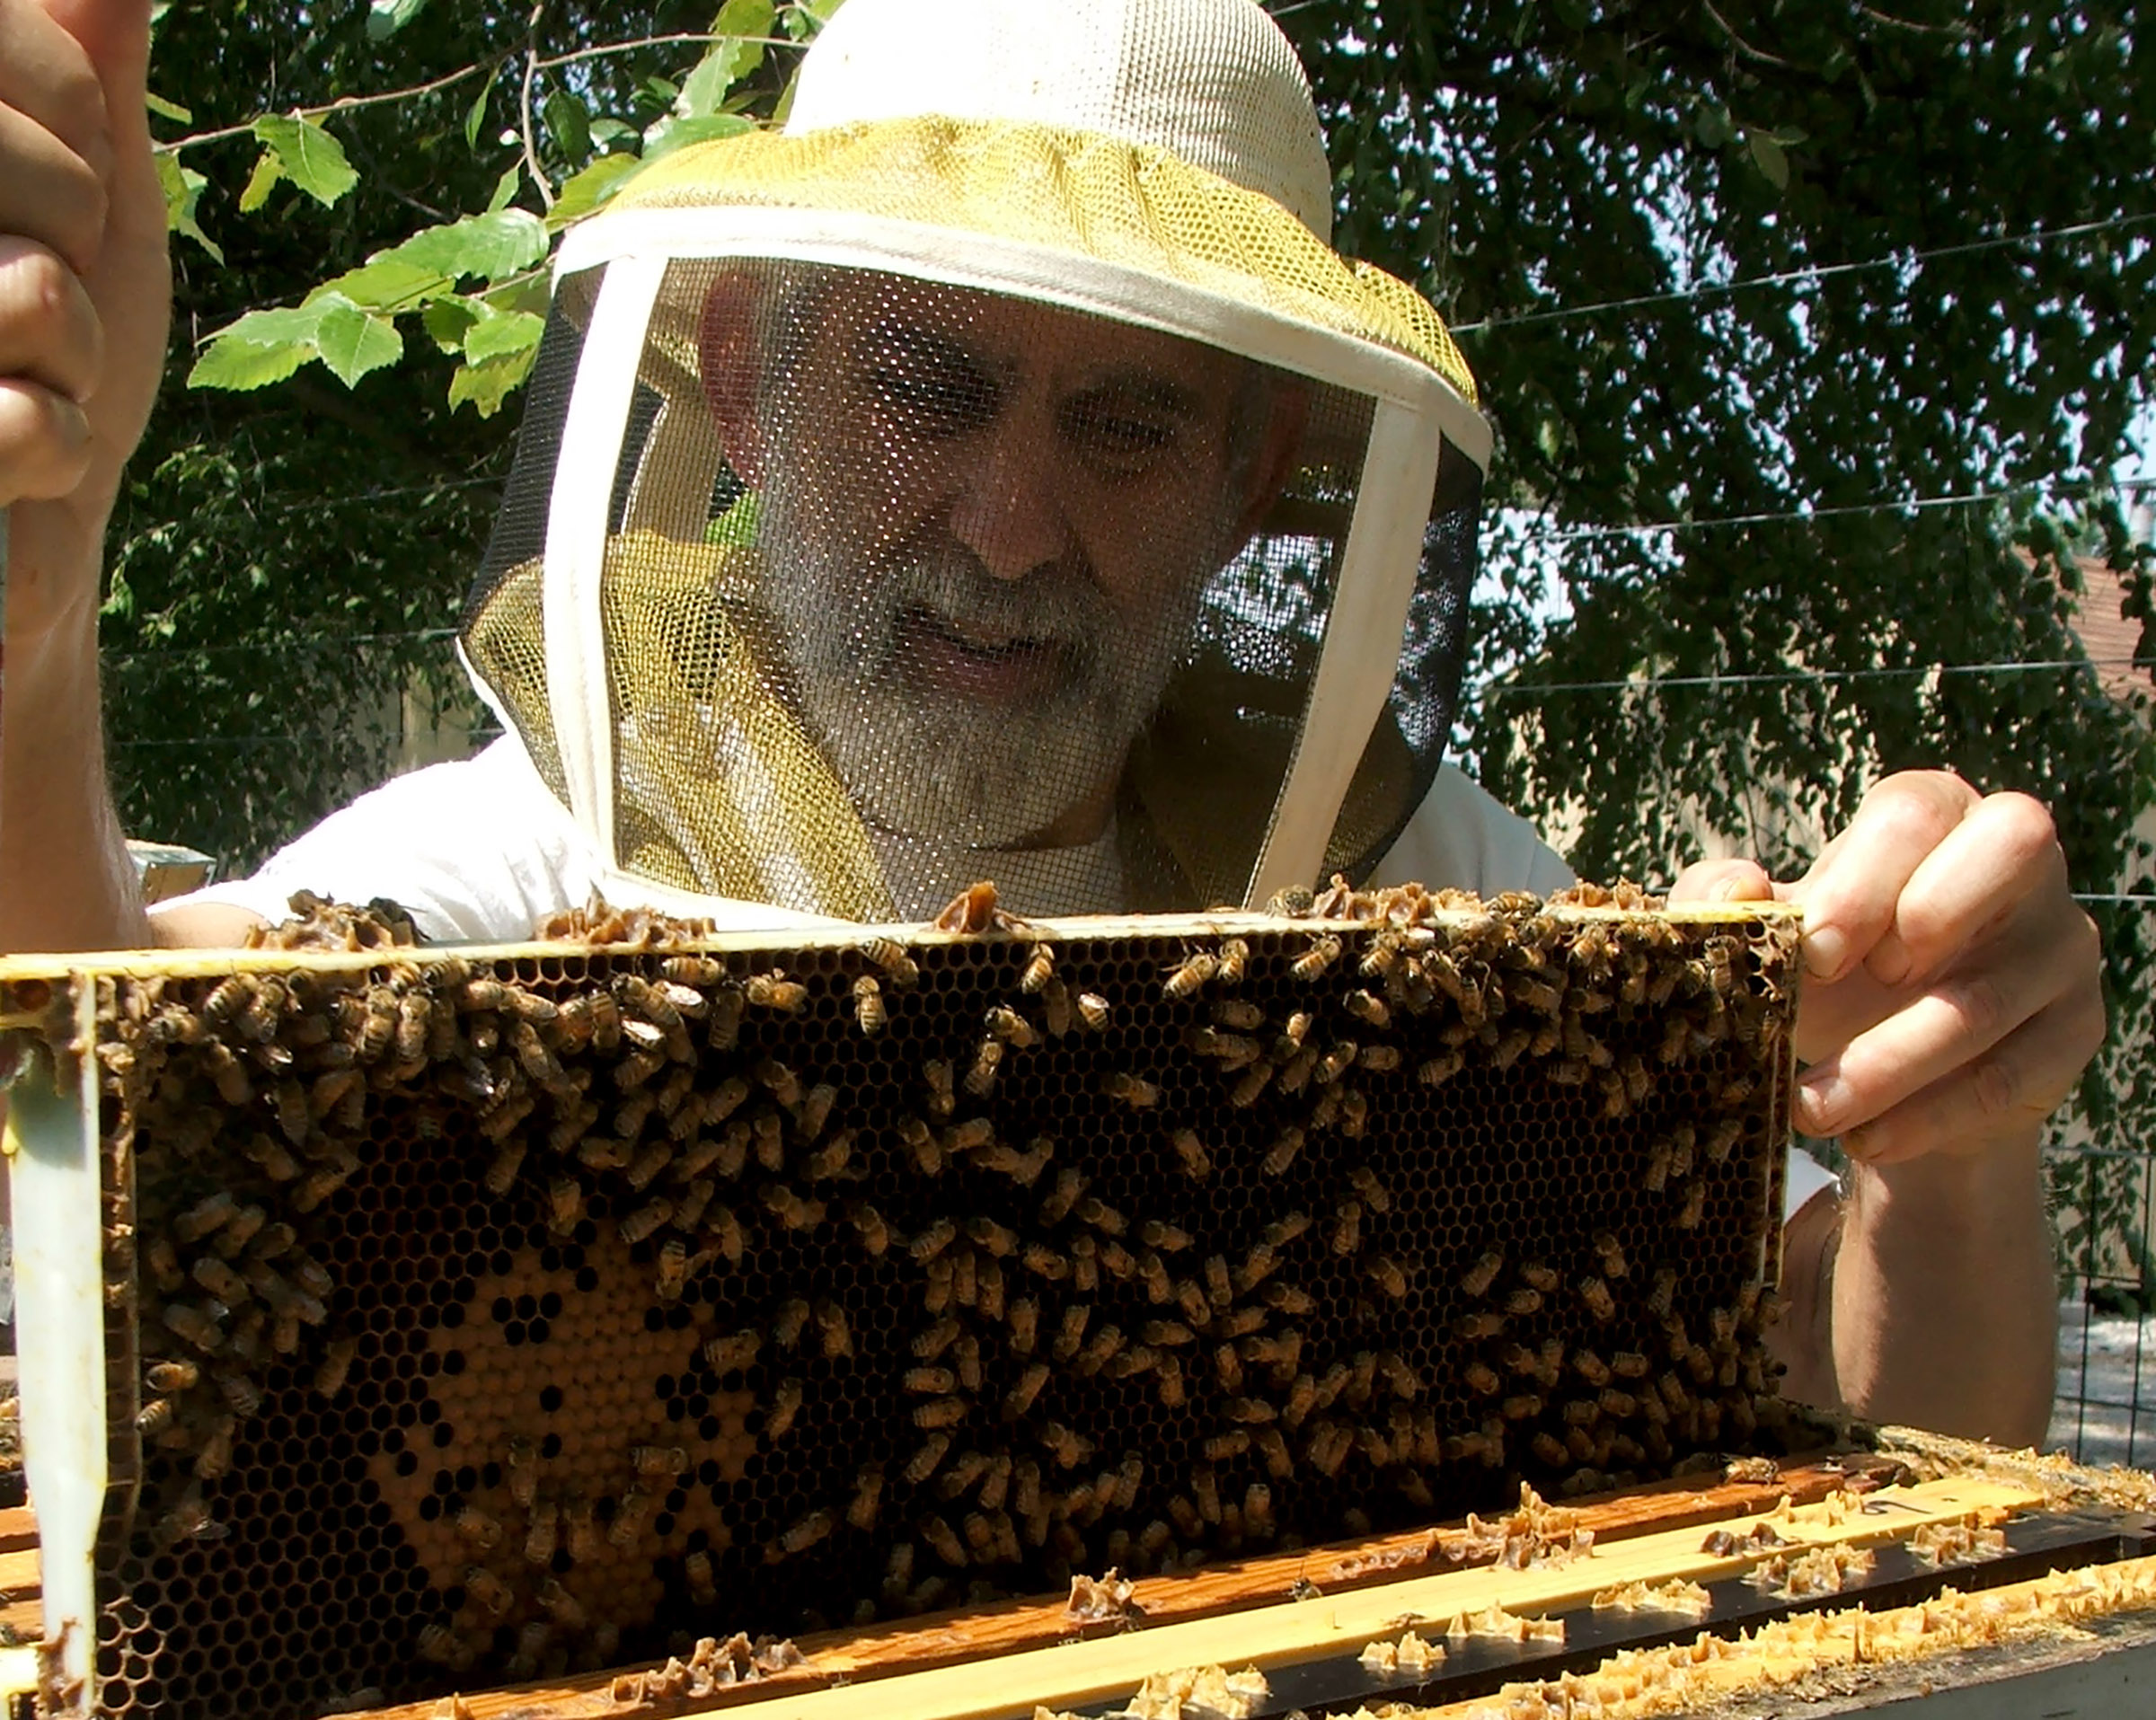 Introduction to Beekeeping